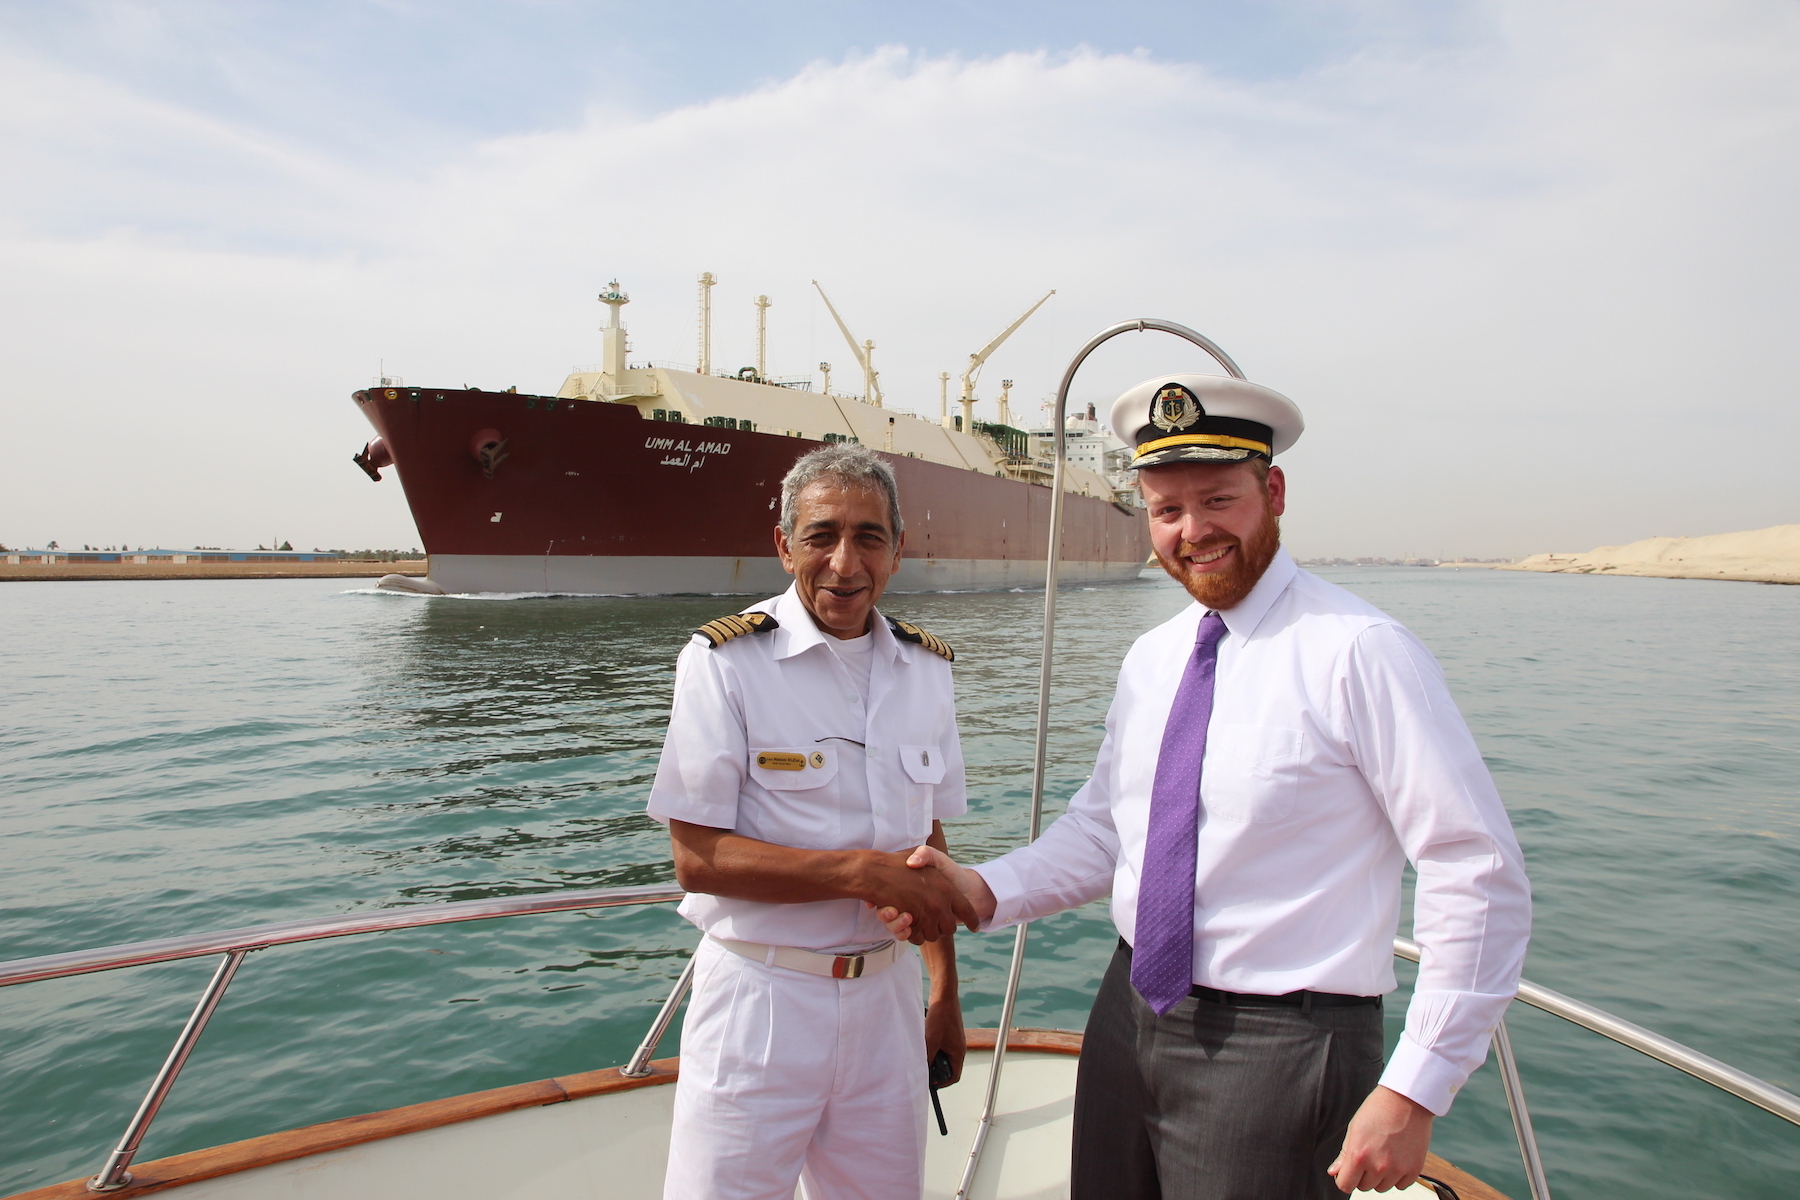 Shaking hands with the captain on the bow of the Egyptian Presidential Yacht on the Suez Canal